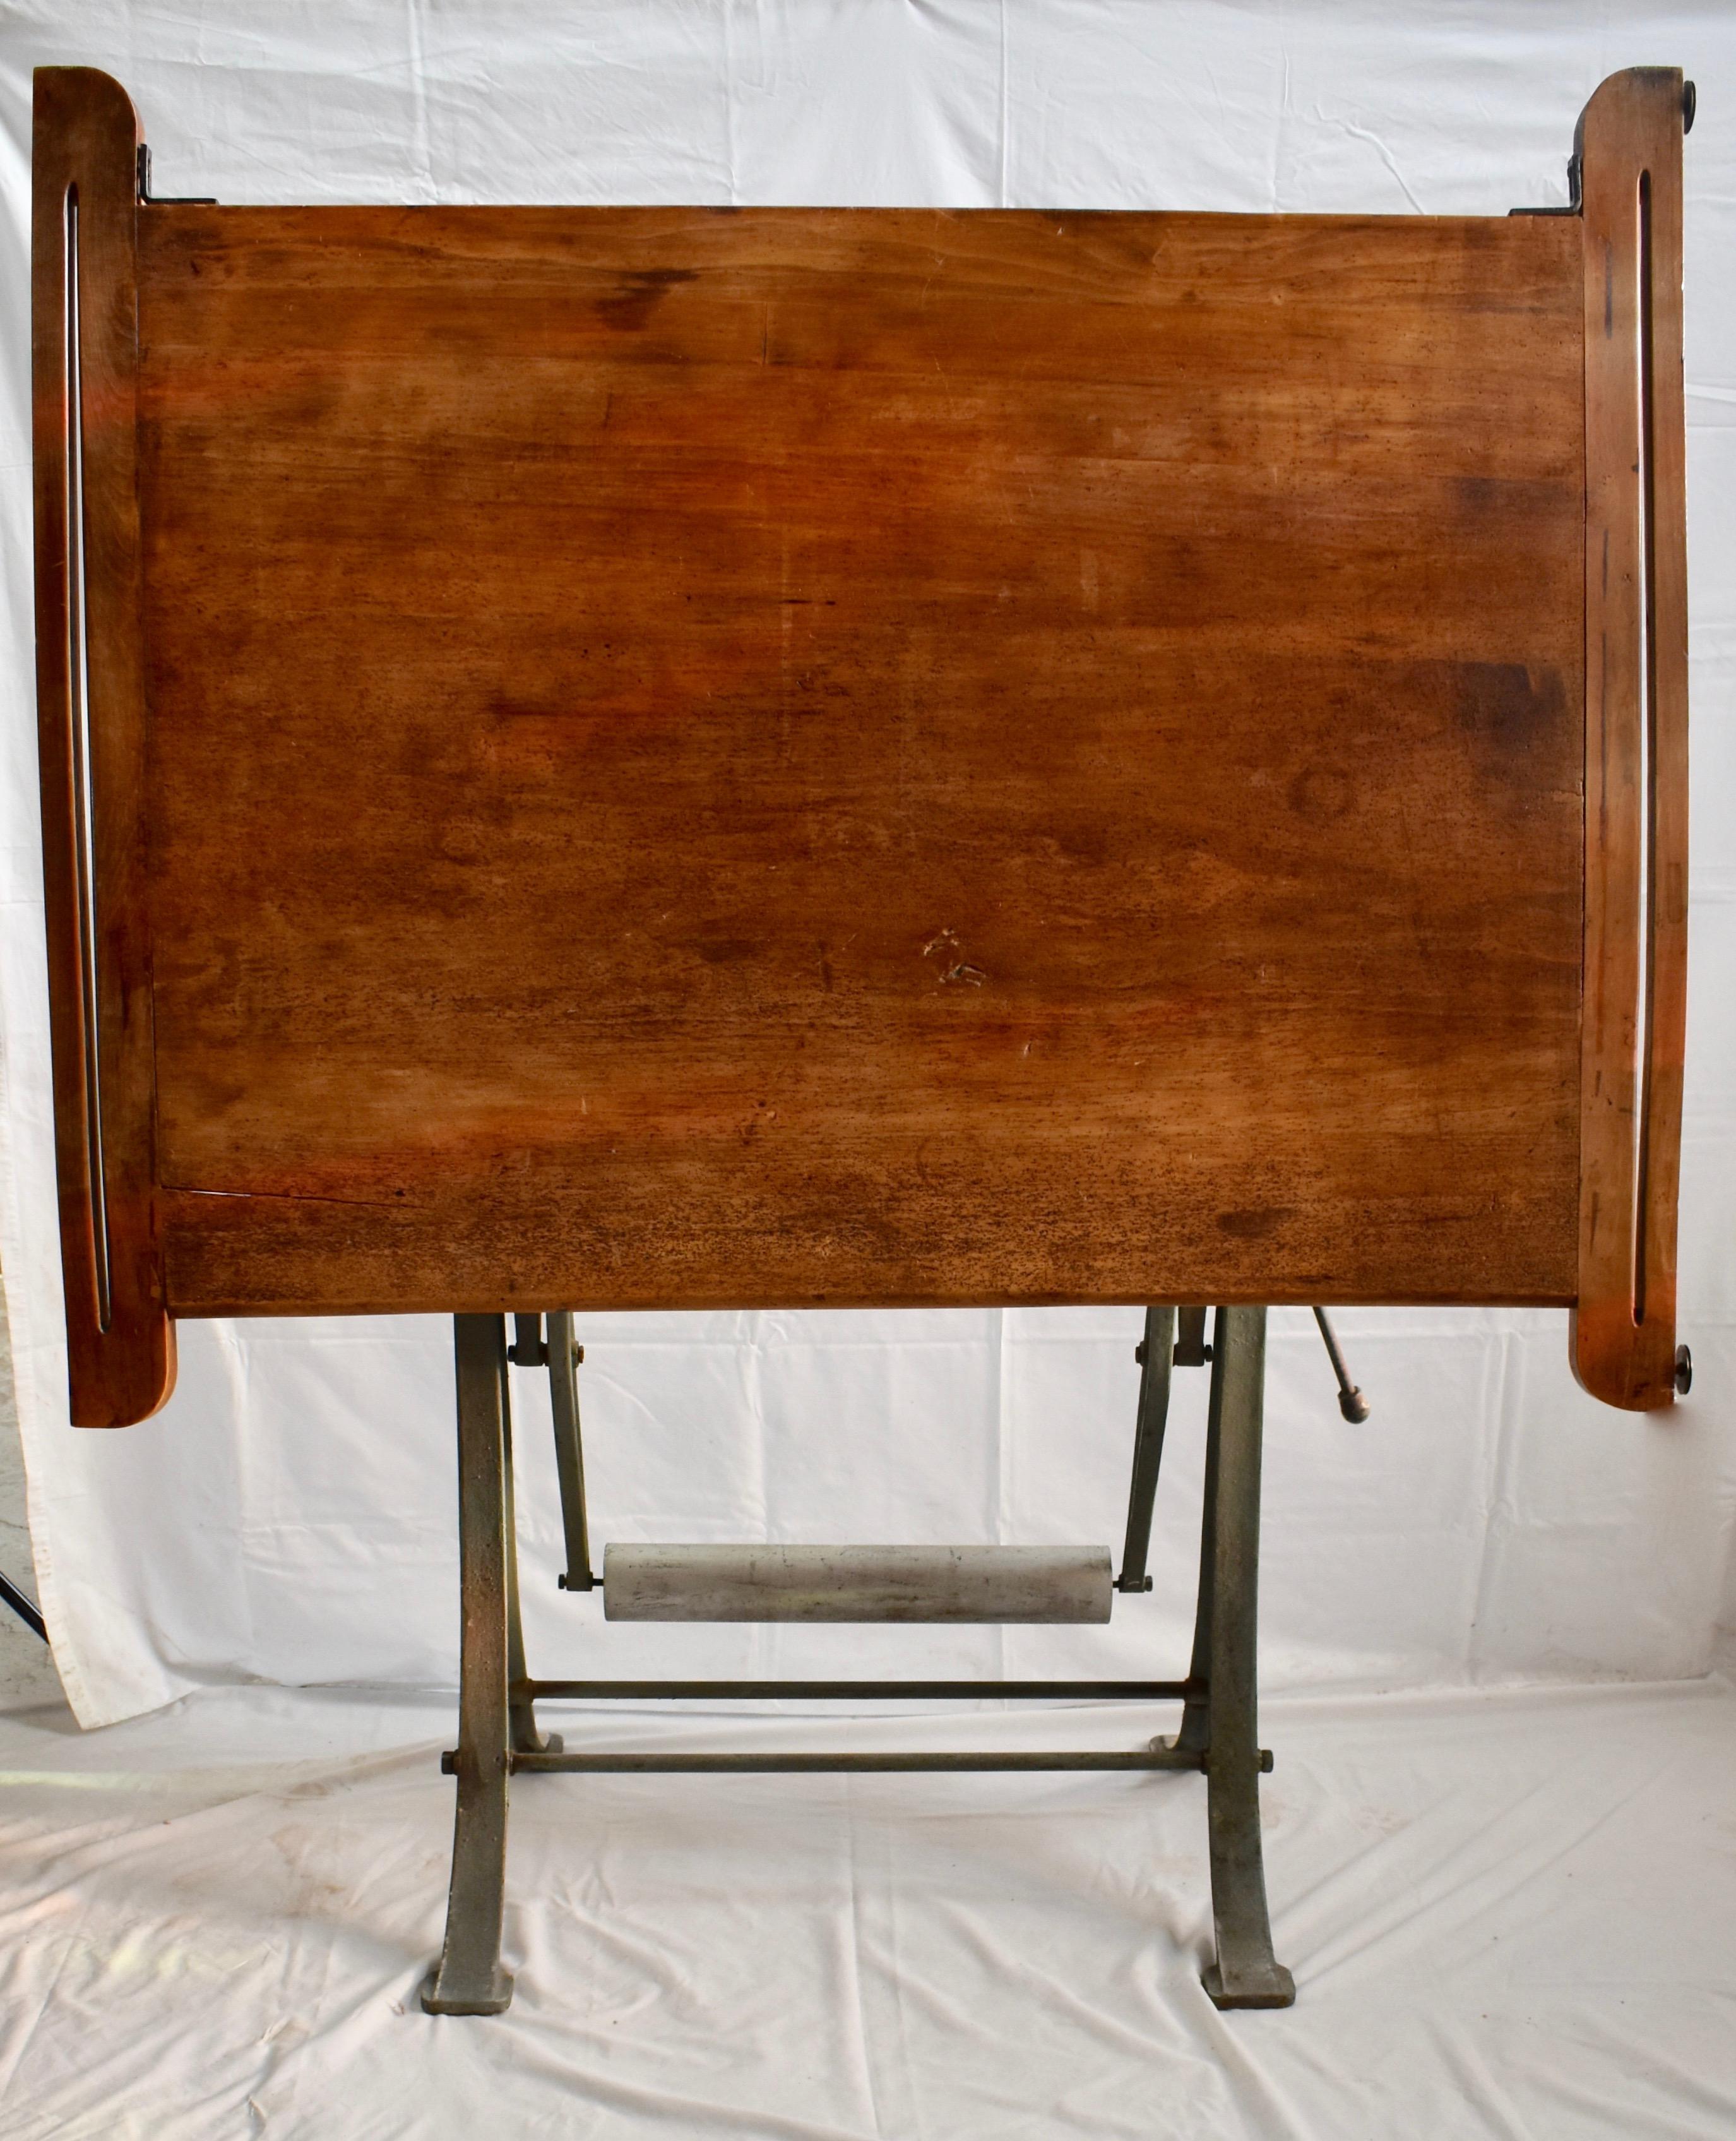 This is a fully adjustable maple drafting table by Kahn Freres of Brussels, Belgium. The cast iron base is in original paint. Nicely worn and mellowed surfaces. Adjusts from 34